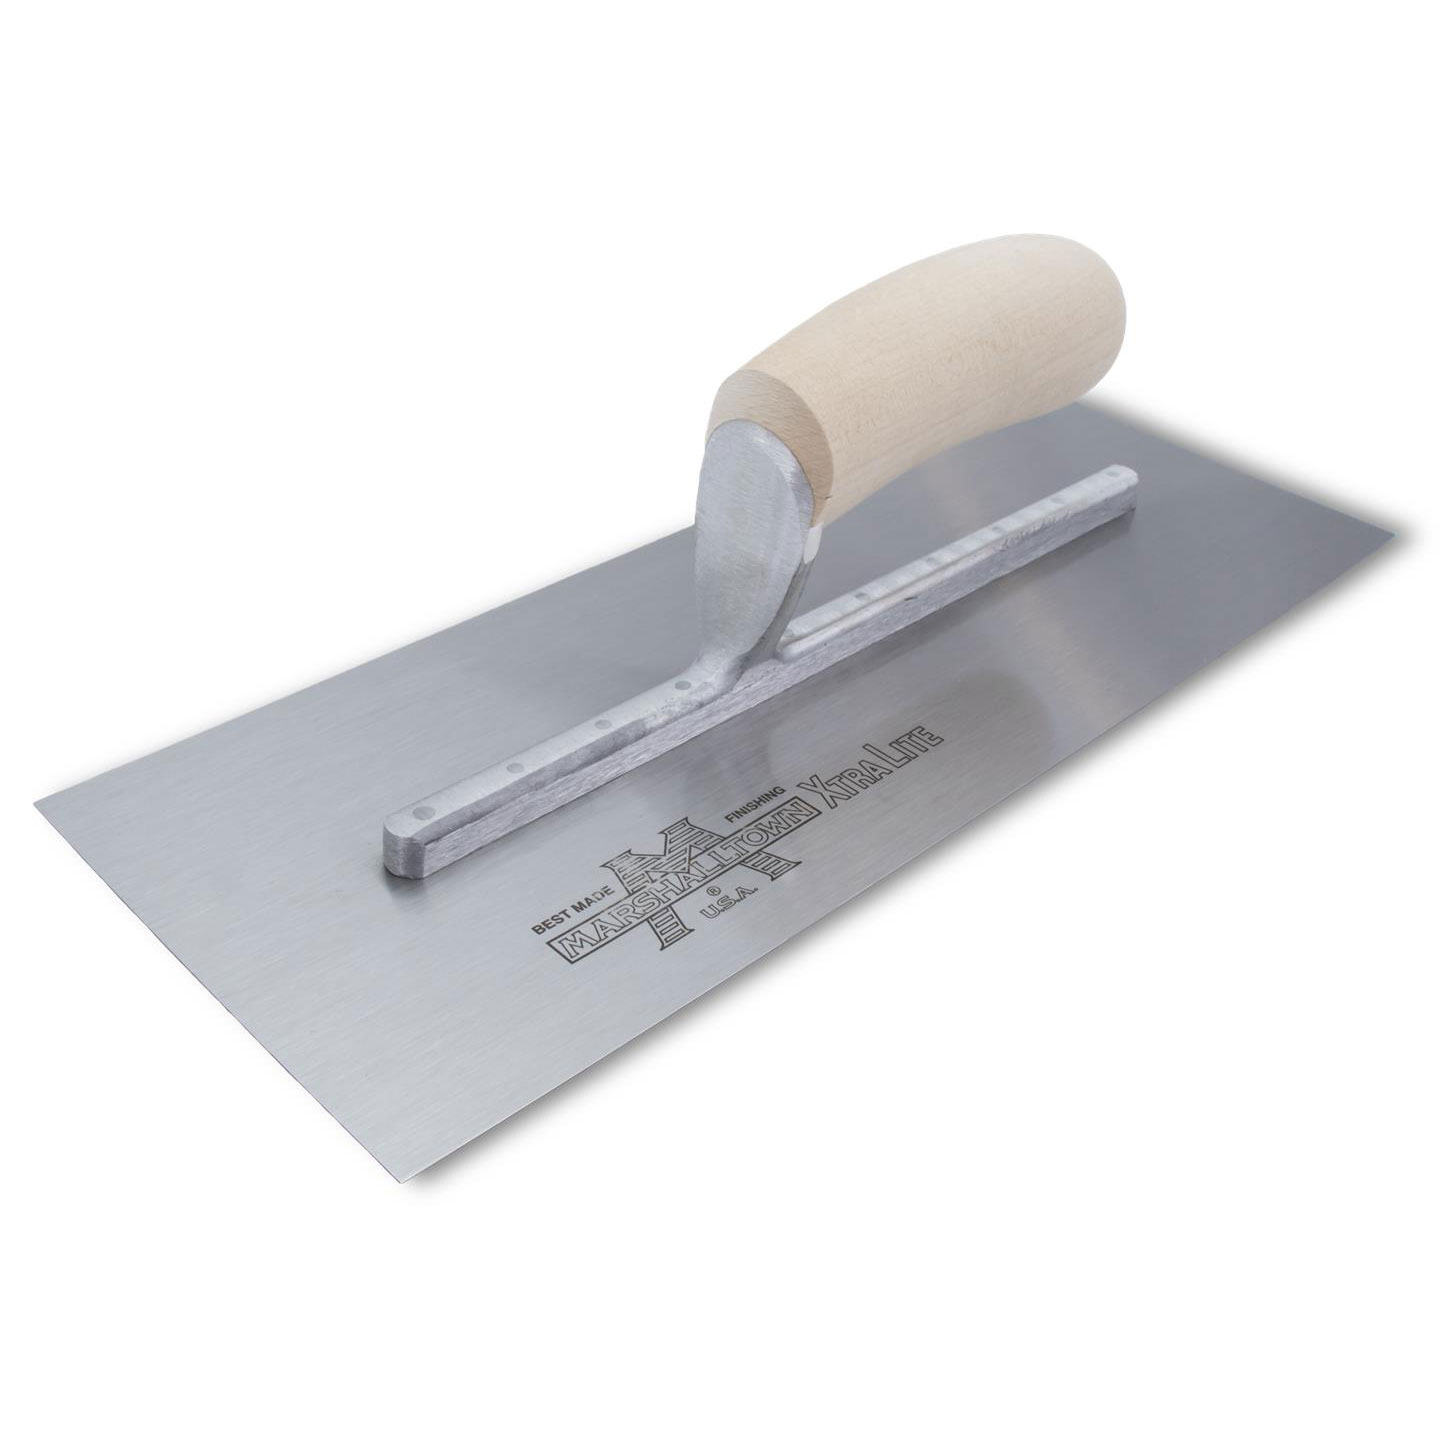 Marshalltown MXS57 14in. x 3in. Finishing Trowel Curved Wood Handle MAT-MXS57